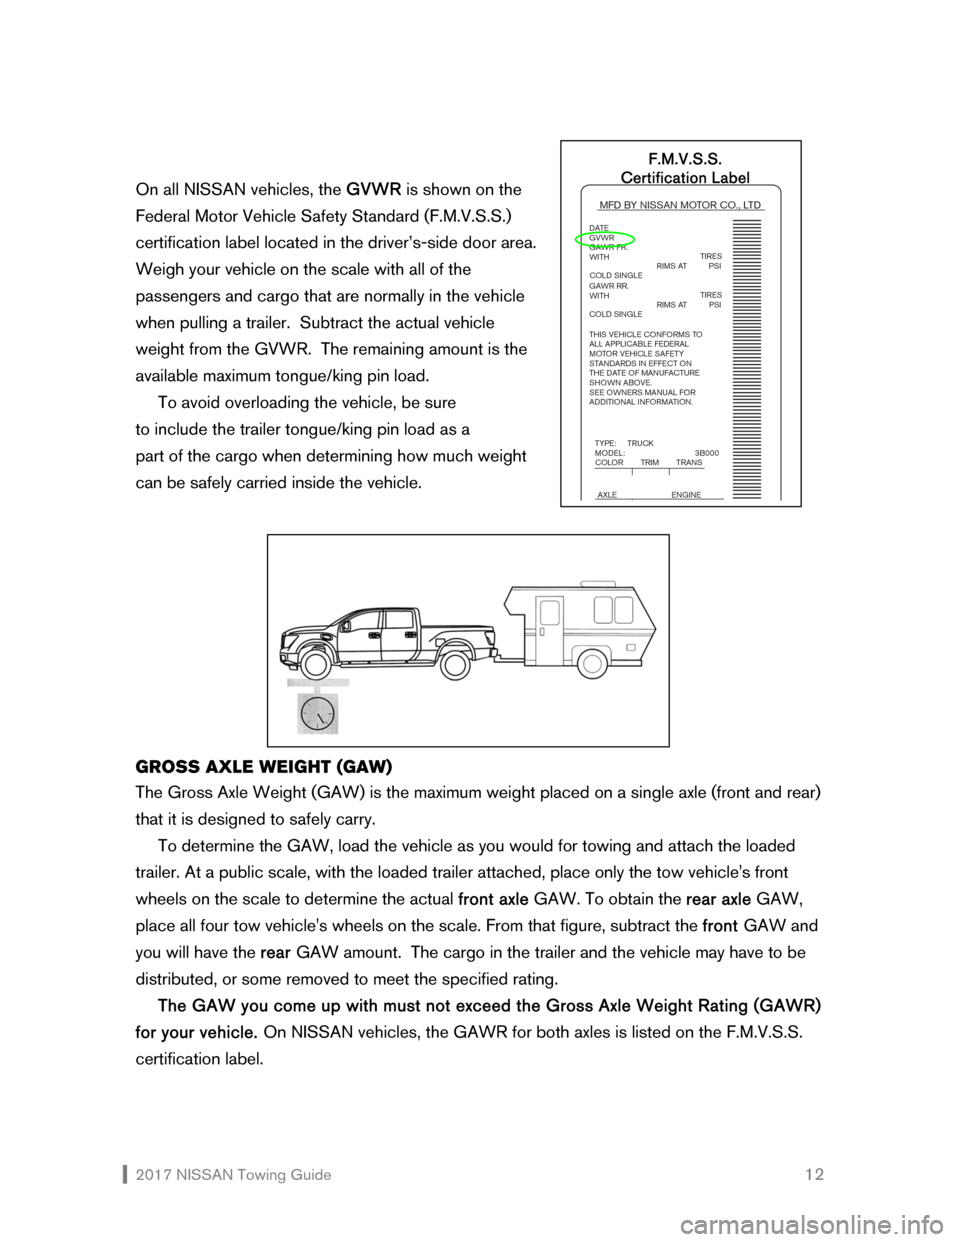 NISSAN NV200 2017 1.G Towing Guide  2017 NISSAN Towing Guide    12  
On all NISSAN vehicles, the GVWR is shown on the  
Federal Motor Vehicle Safety Standard (F.M.V.S.S.) 
certification label located in the driver’s-side door area.  